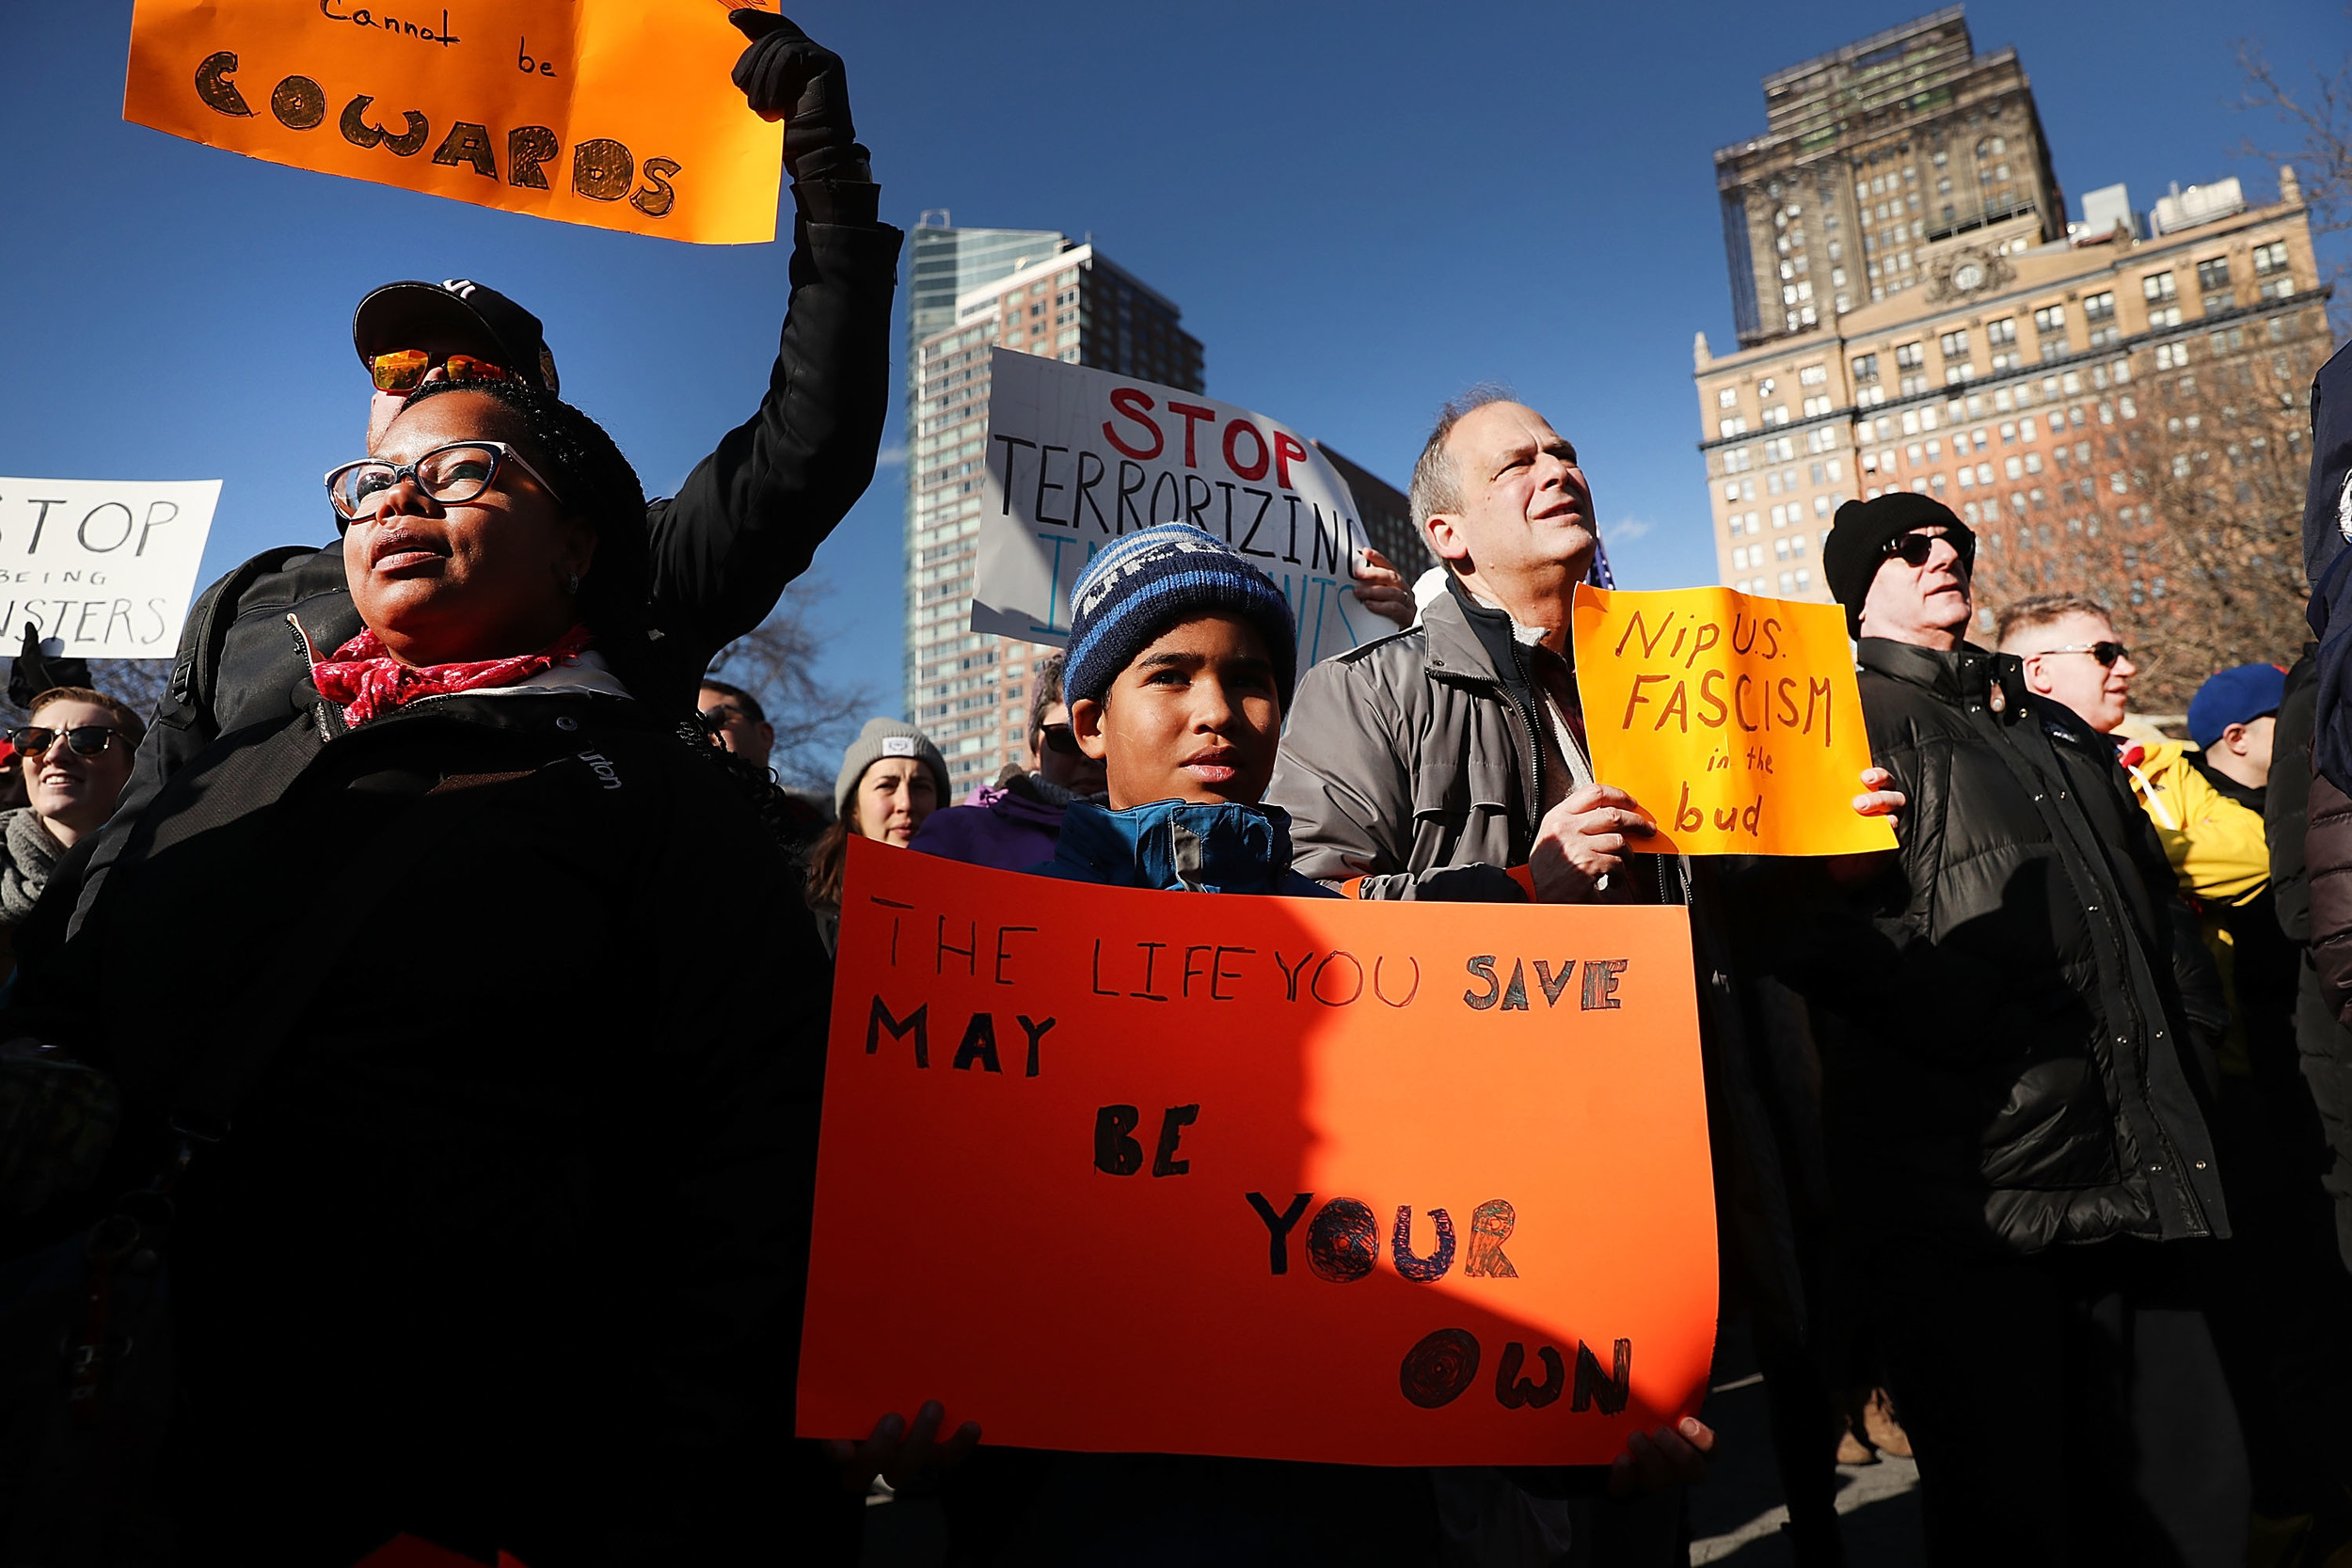 Photographer Spencer Platt captured this image of Point Lookout resident Chris Connolly, far left, with his wife, Joy, and son, Oliver, at a protest in Battery Park on Jan. 29. The image was used by major news media organizations such as The New York Times.